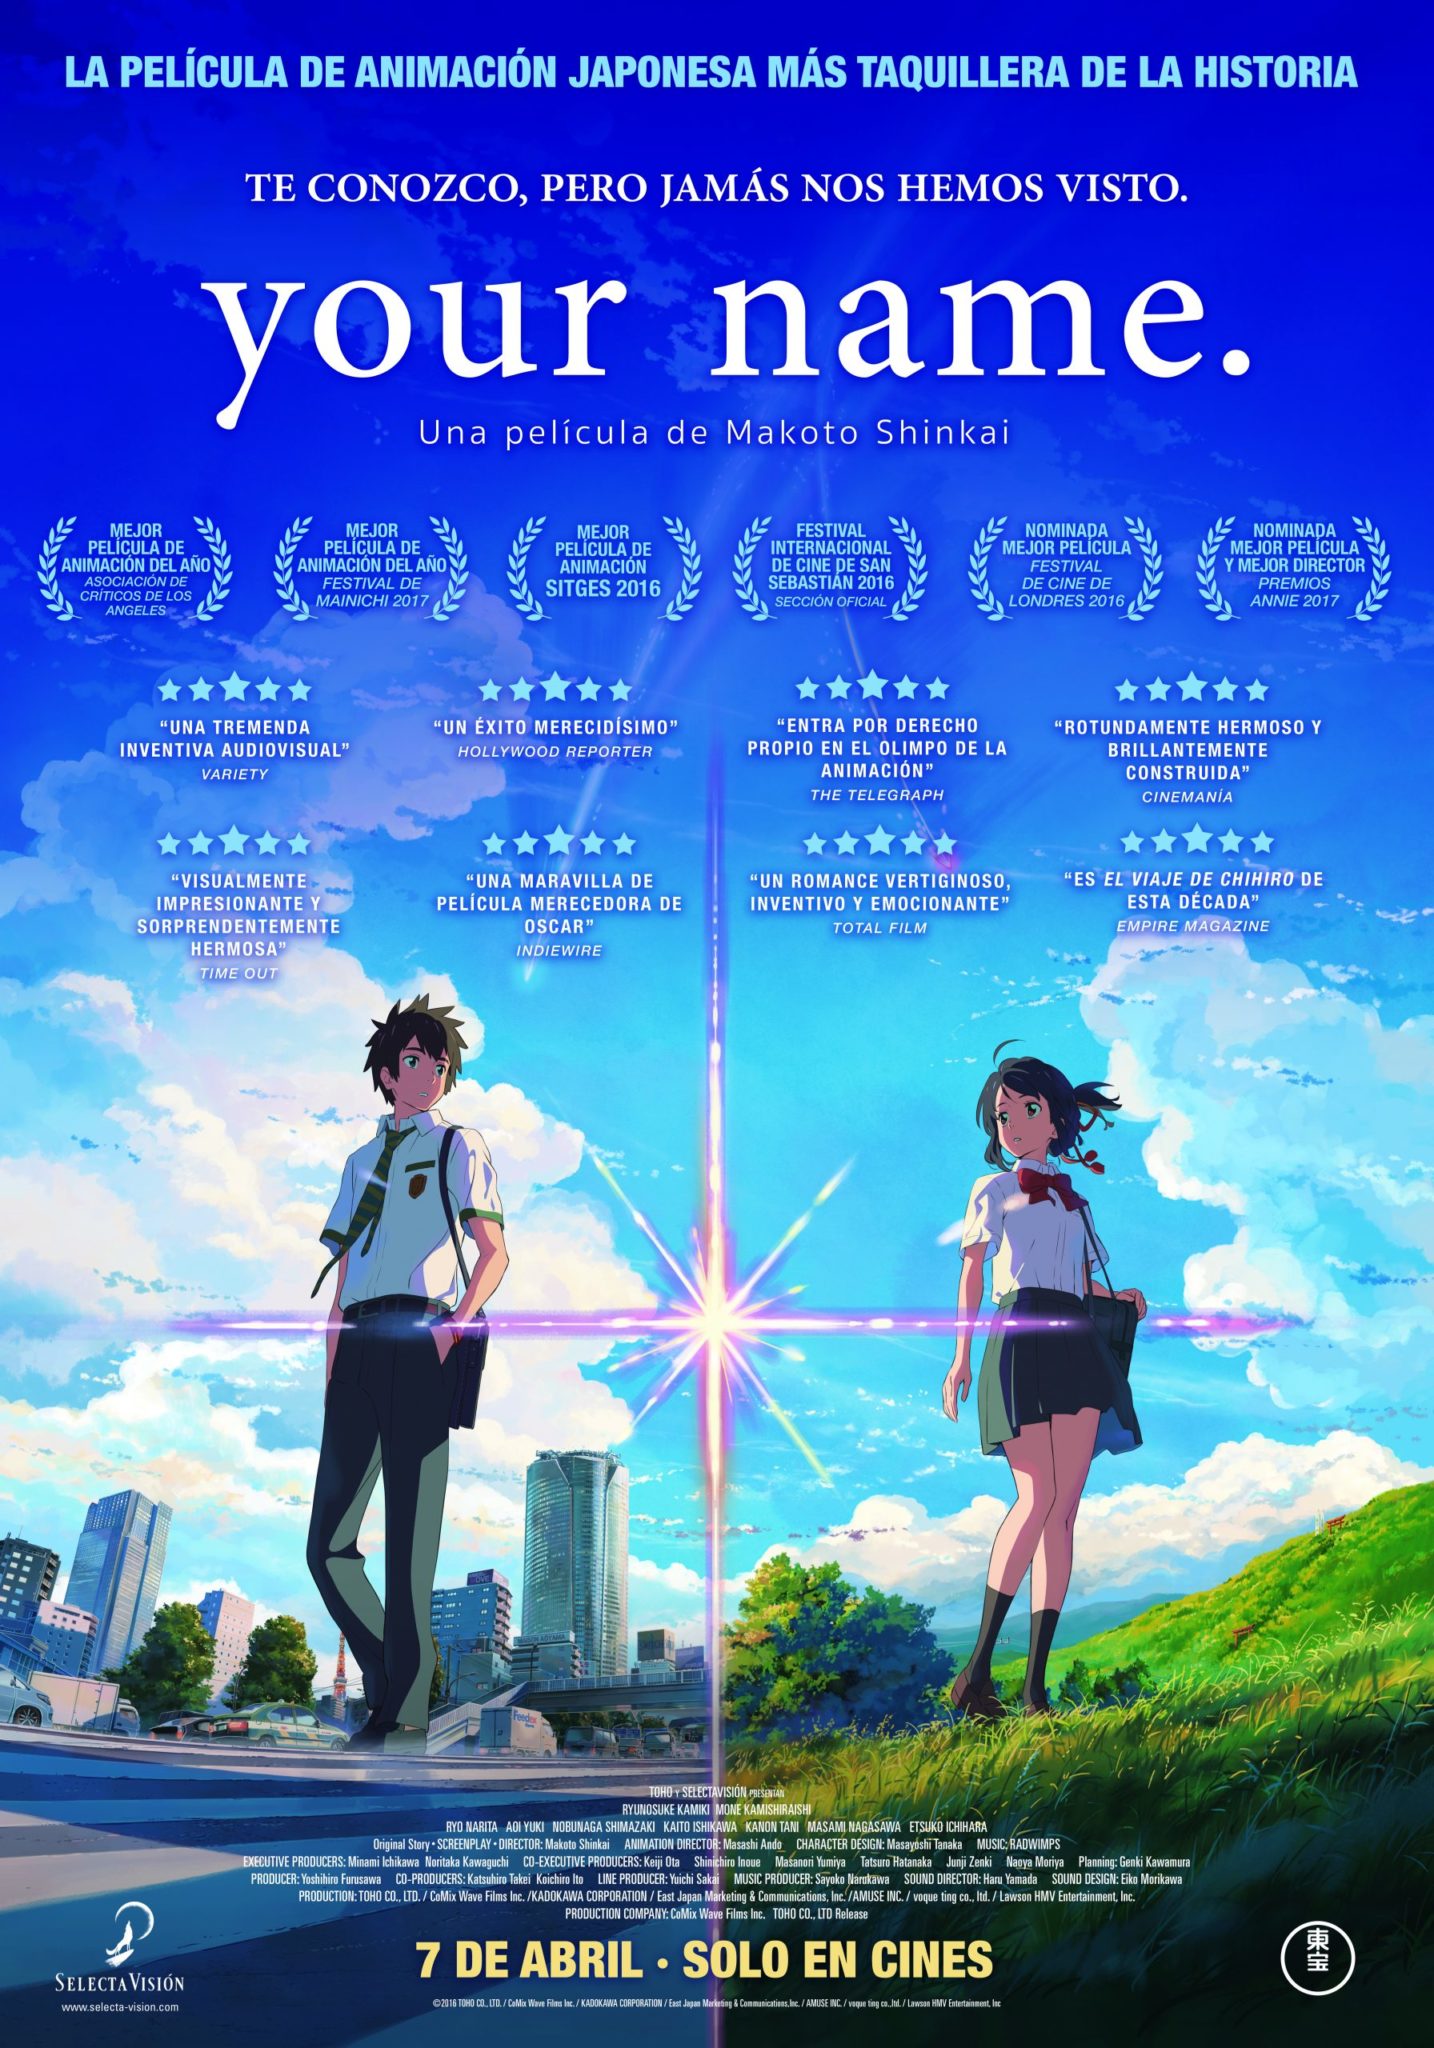 Your name 100x70 v2A